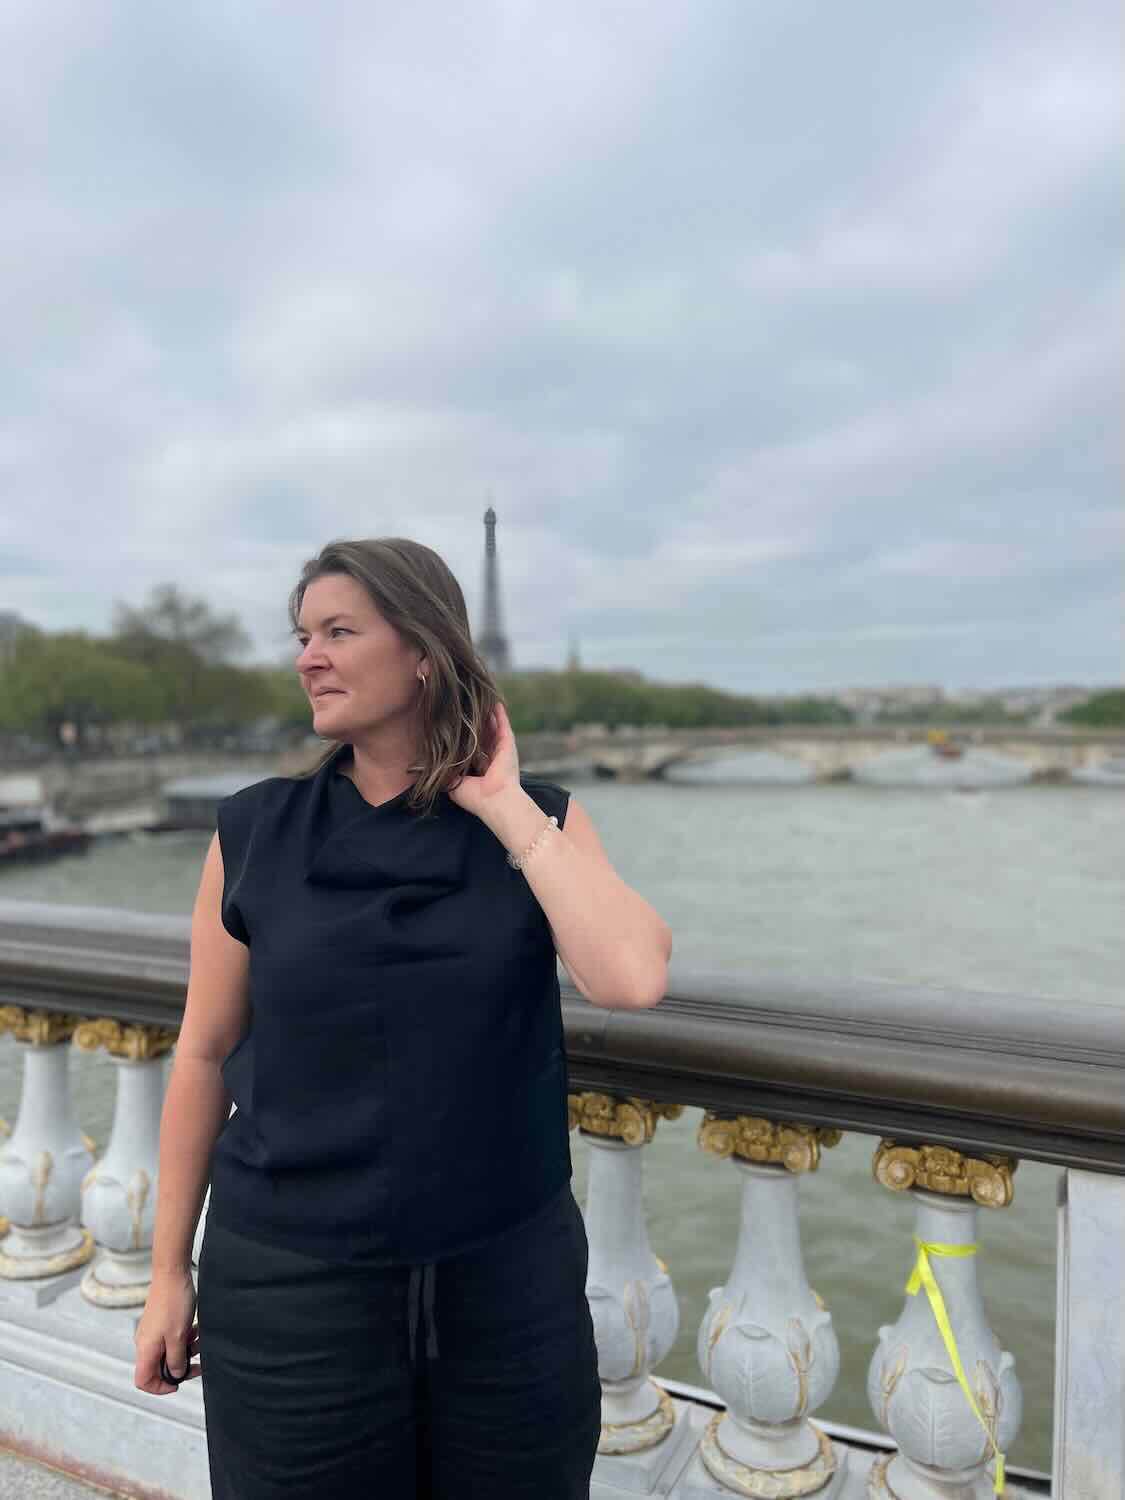 A solo female traveler standing by the Seine river in Paris, looking to the side with the Eiffel Tower in the distant background. She is dressed in a black sleeveless top and black pants.